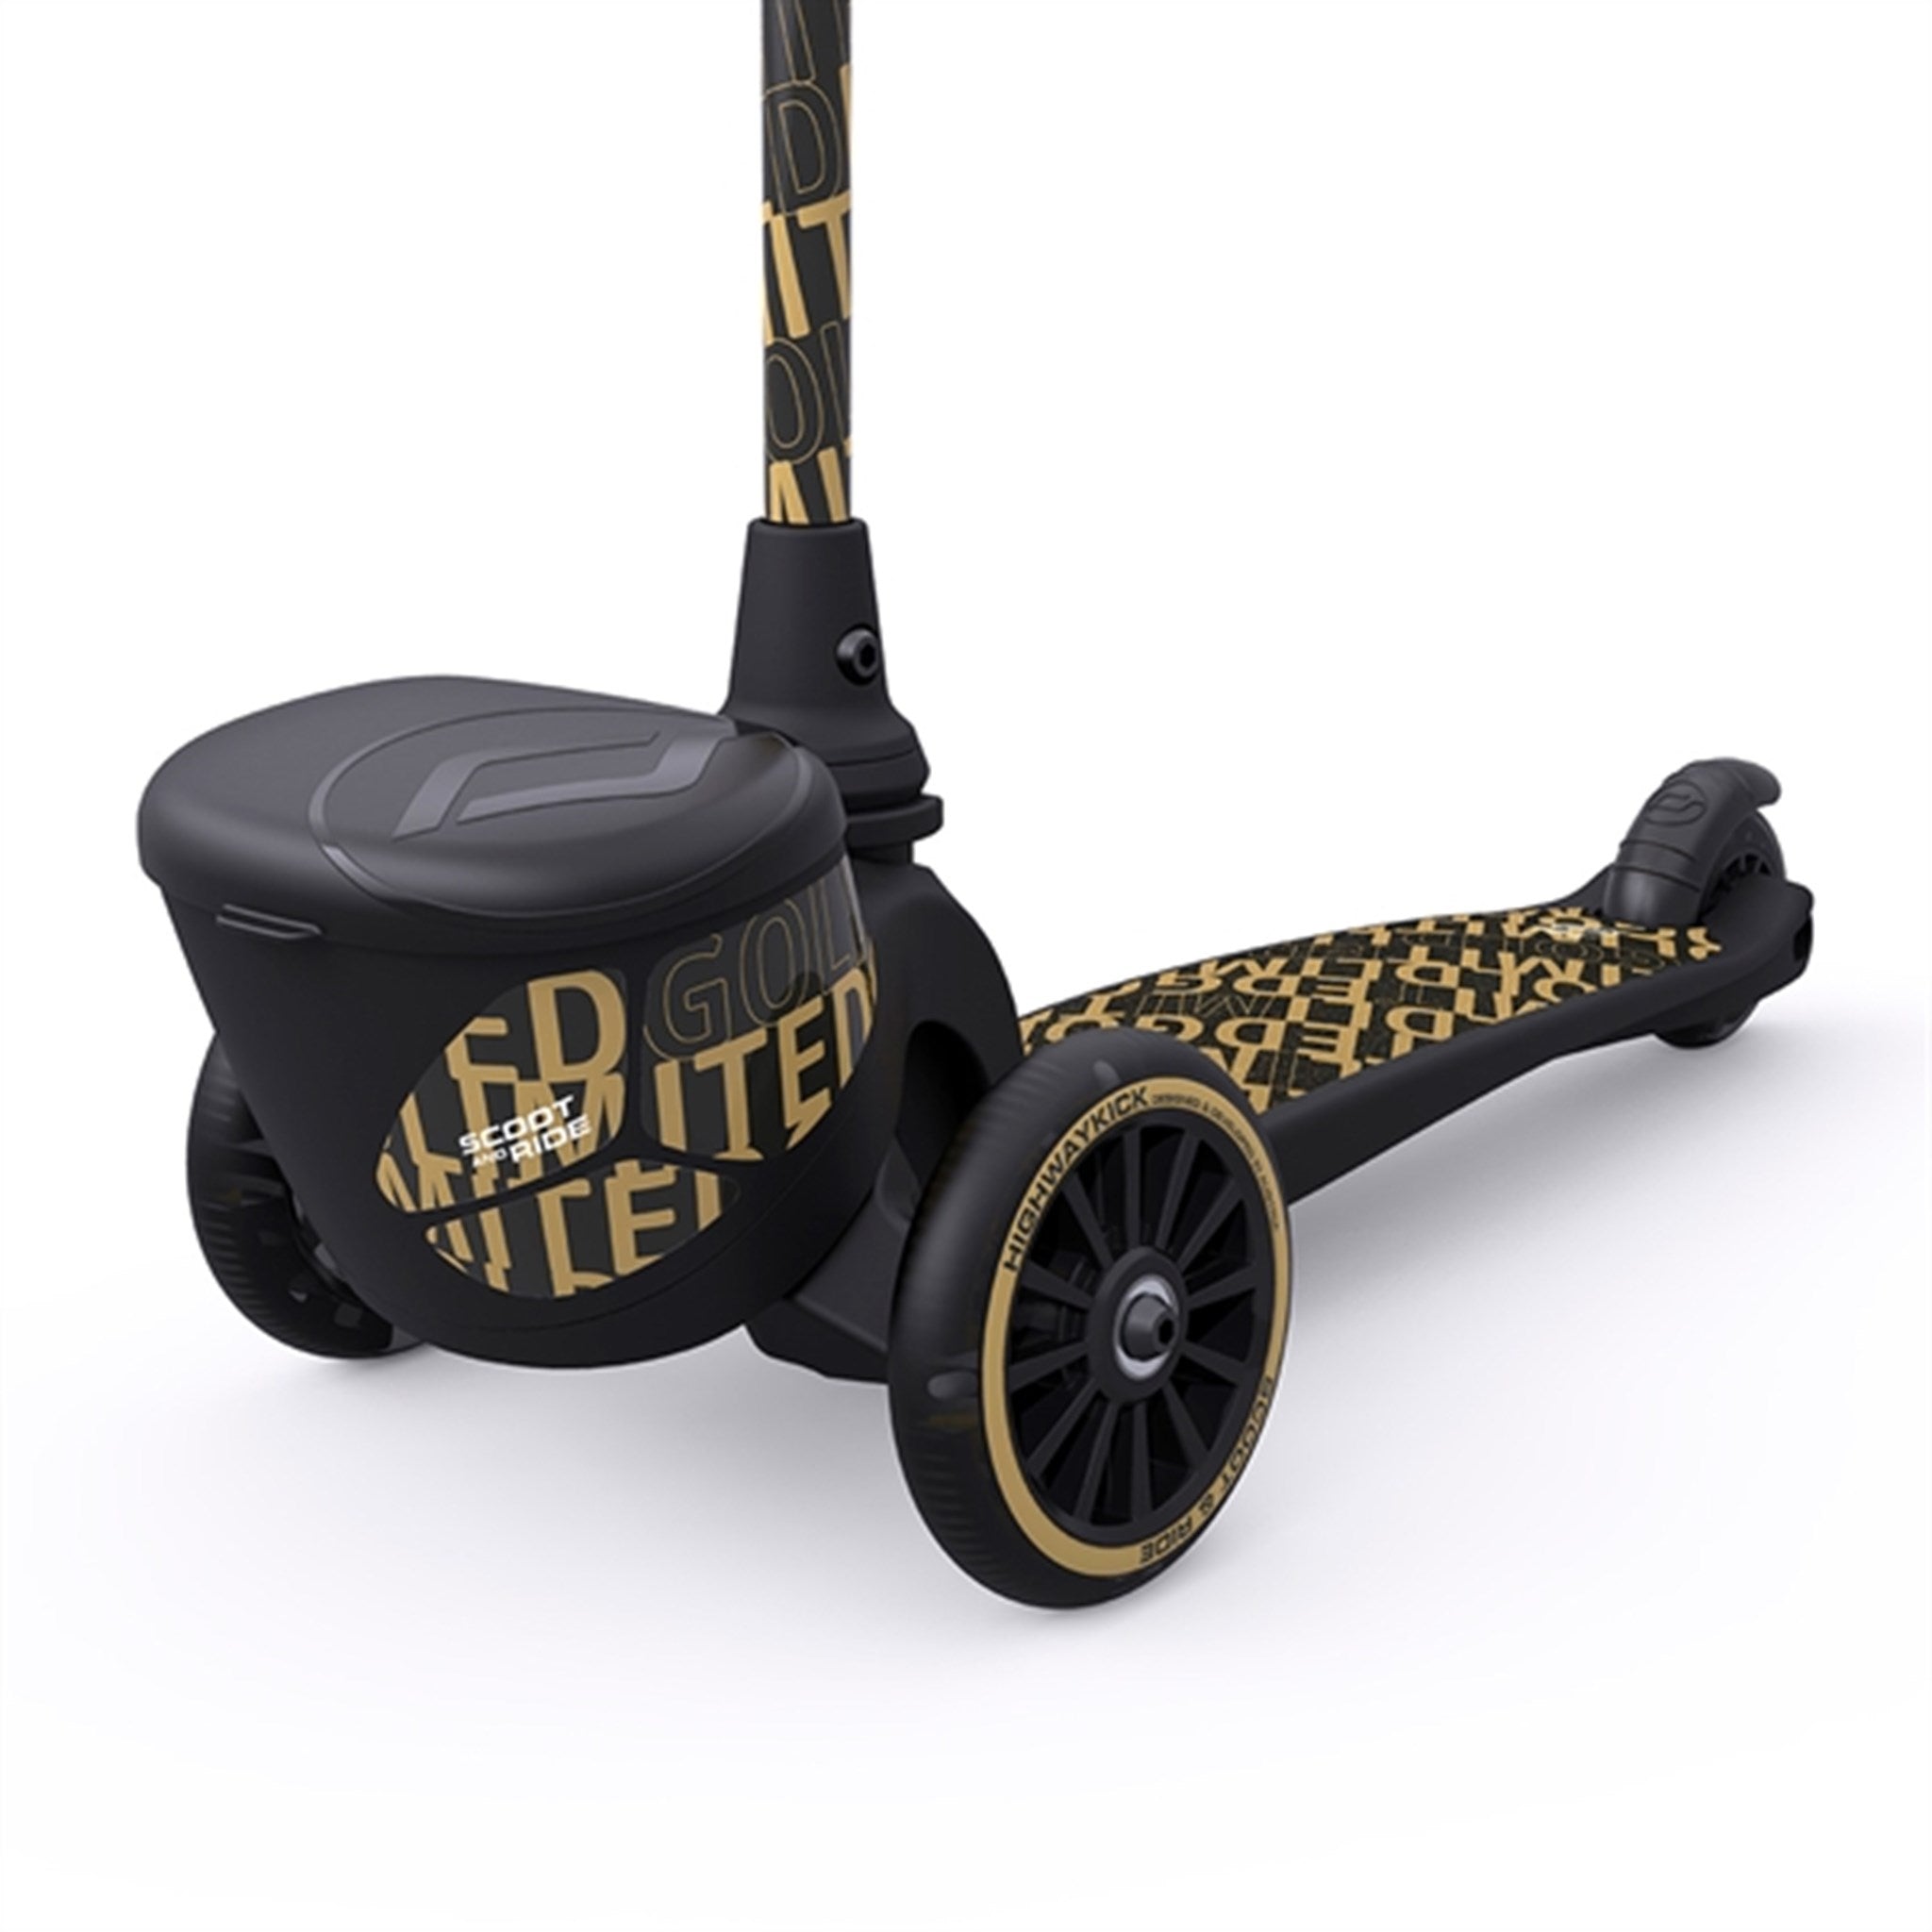 Scoot and Ride Highway Kick 2 Lifestyle Black/Gold 4